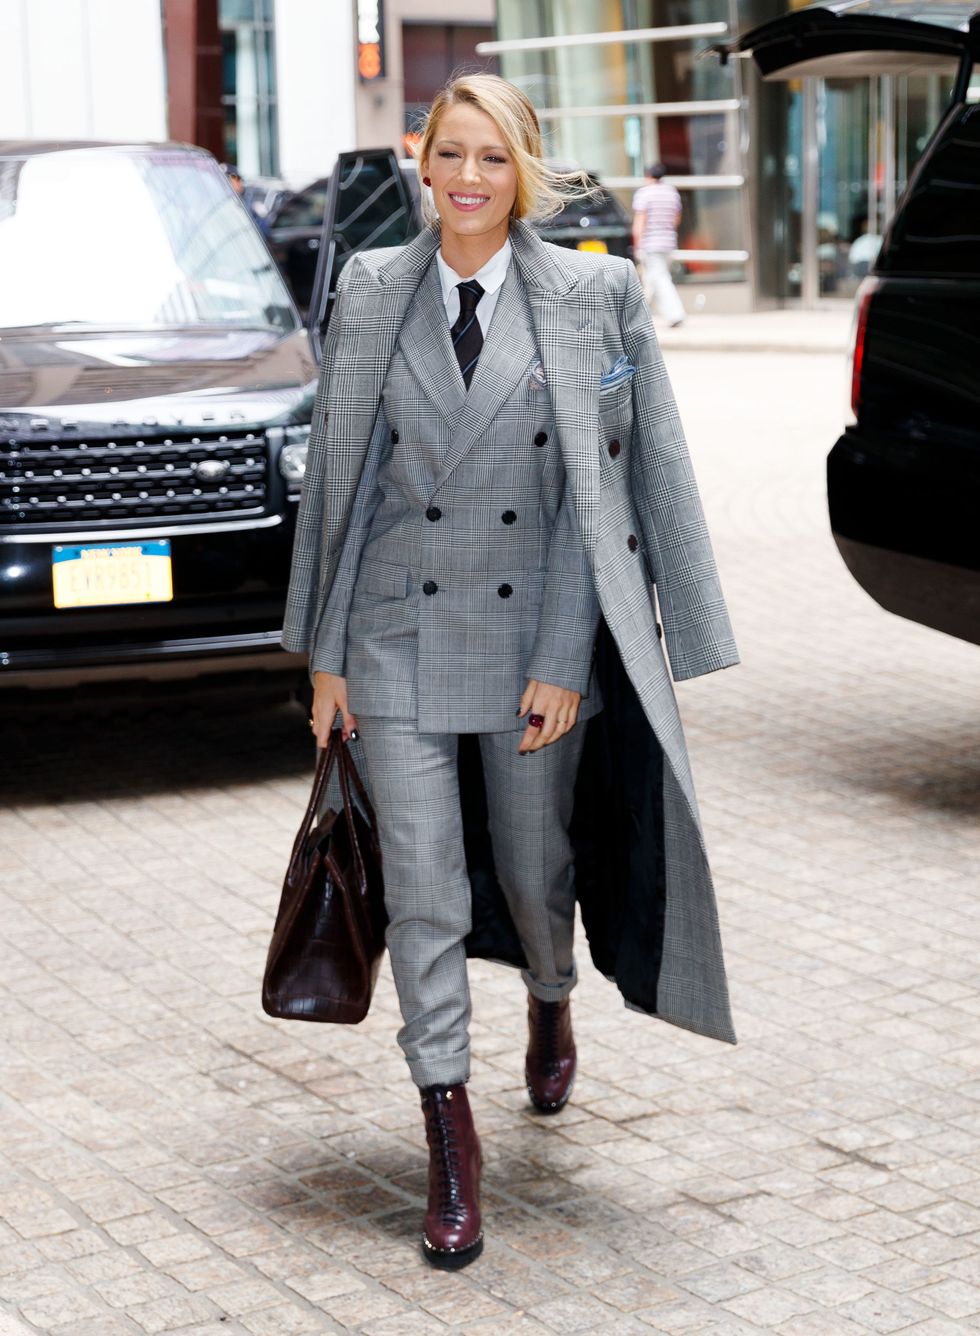 Blake Lively out and about in a double breasted suit in New York.